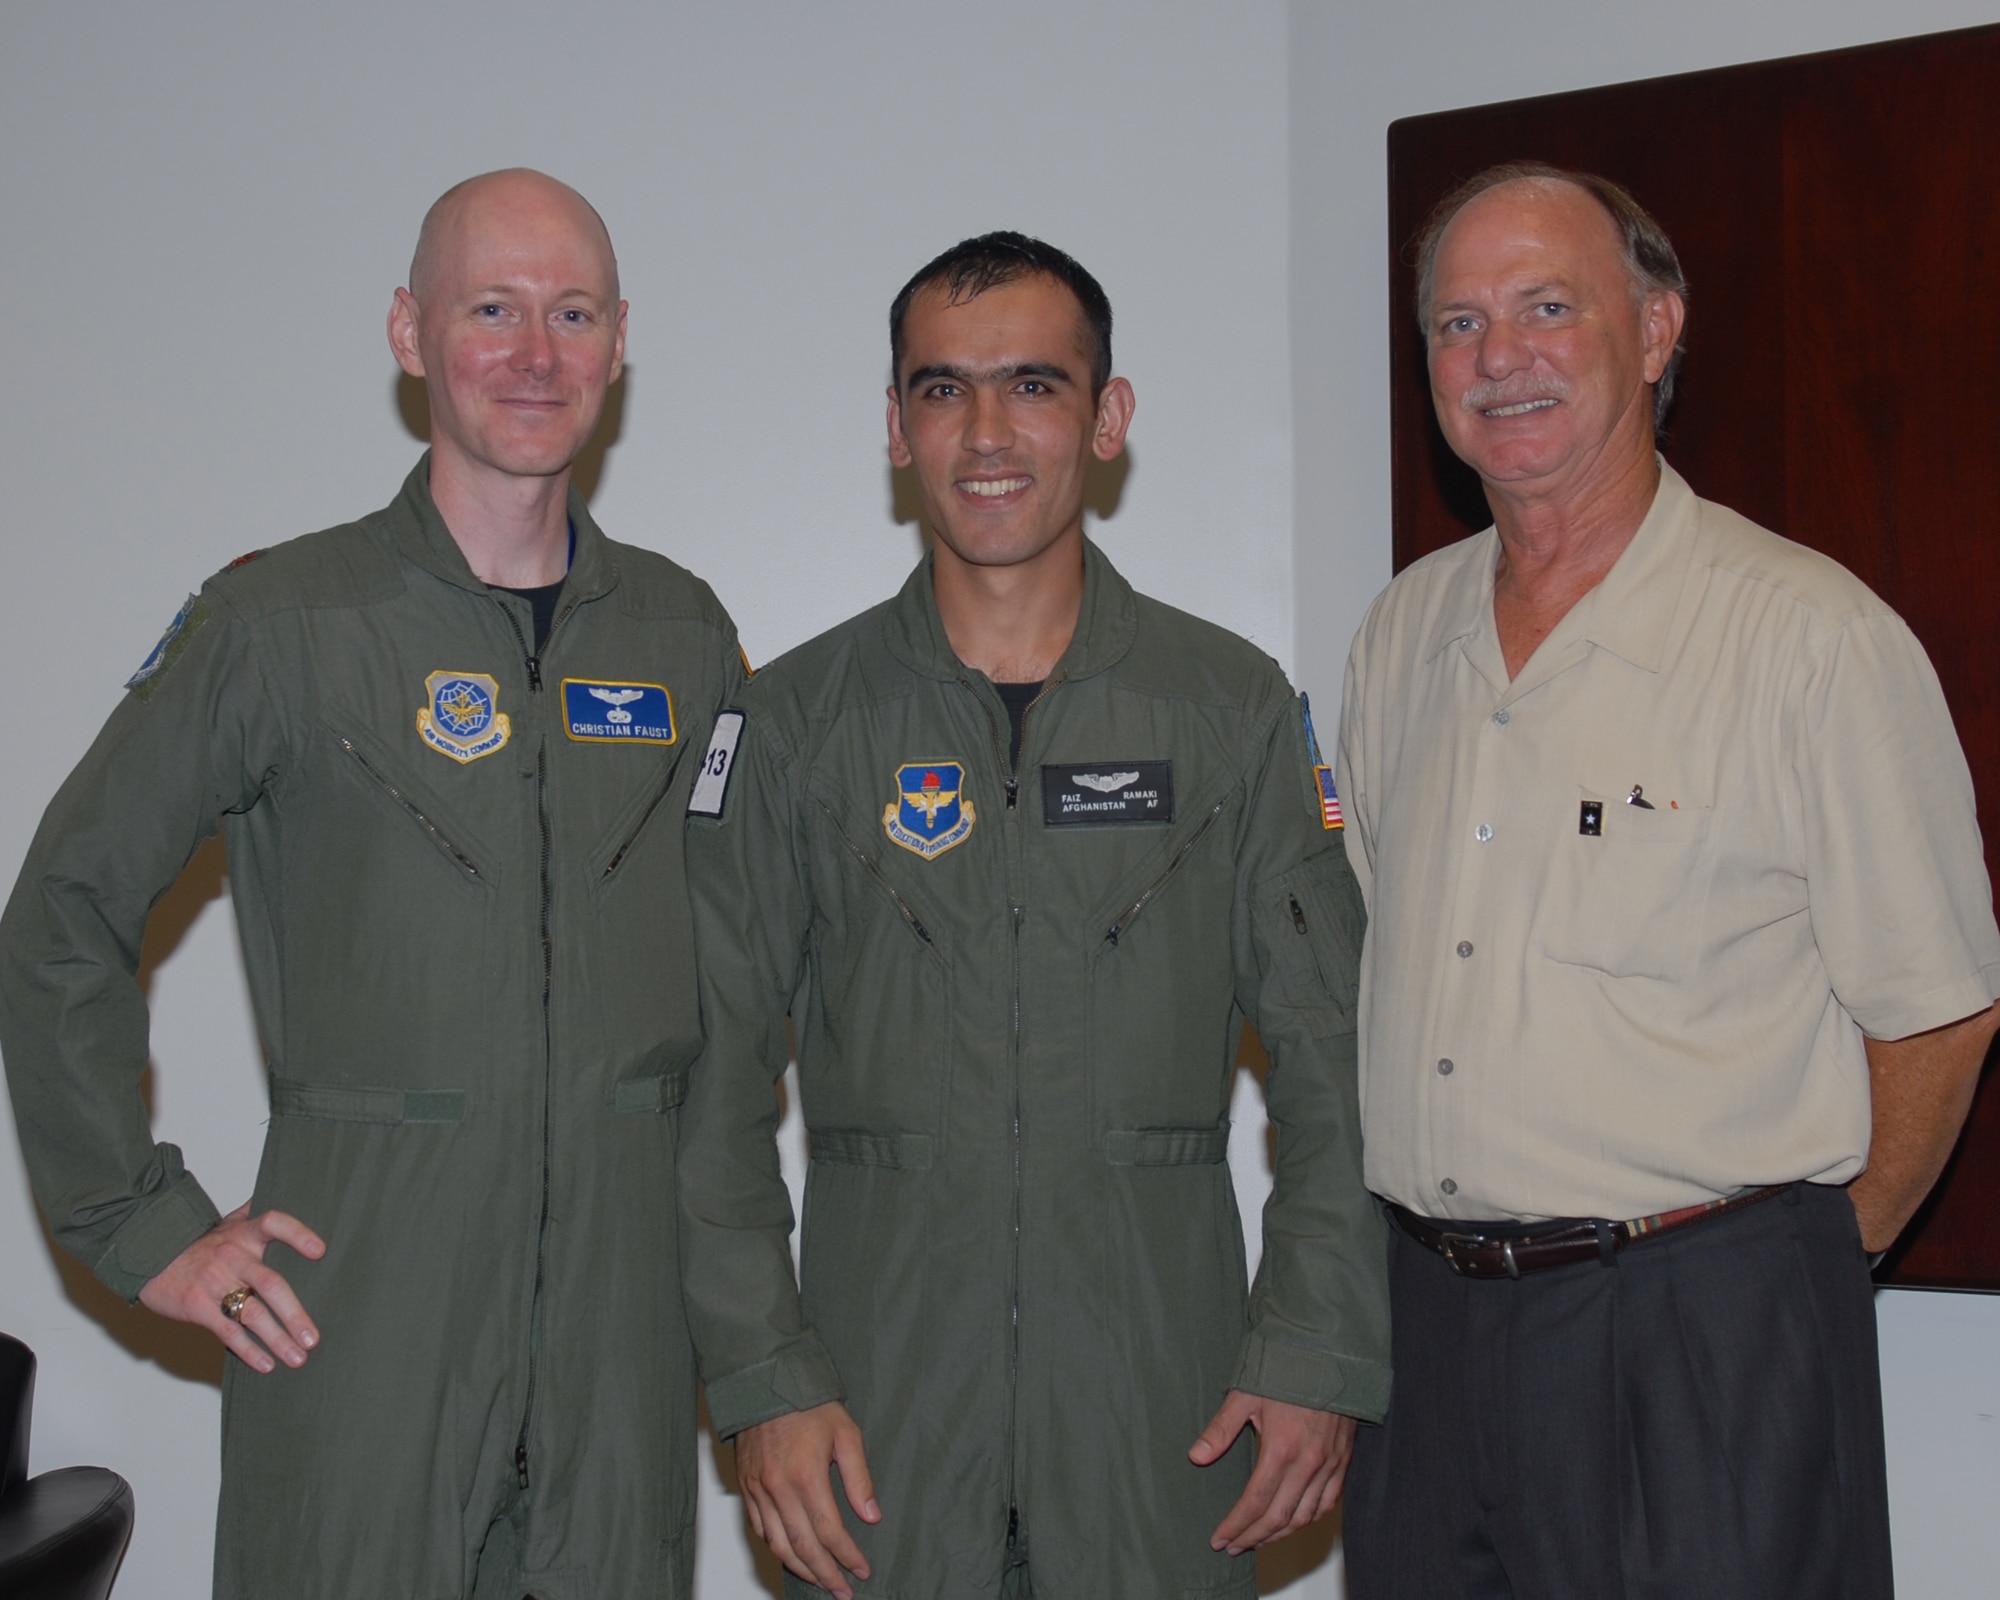 Afghan National Army Air Corps Lieutenant Faiz Ramaki poses with two of his American mentors after receiving his Air Force wings at special graduation ceremony June 12. Lt. Ramaki is the first Afghan student to graduate from U.S. pilot training in almost 50 years. Major Christian Faust and CW4 (ret) Ronald Warner where stationed in Afghanistan when Lt. Ramaki was selected for the Aviation Leadership Program. (US Air Force Photo/Melissa Duncan)